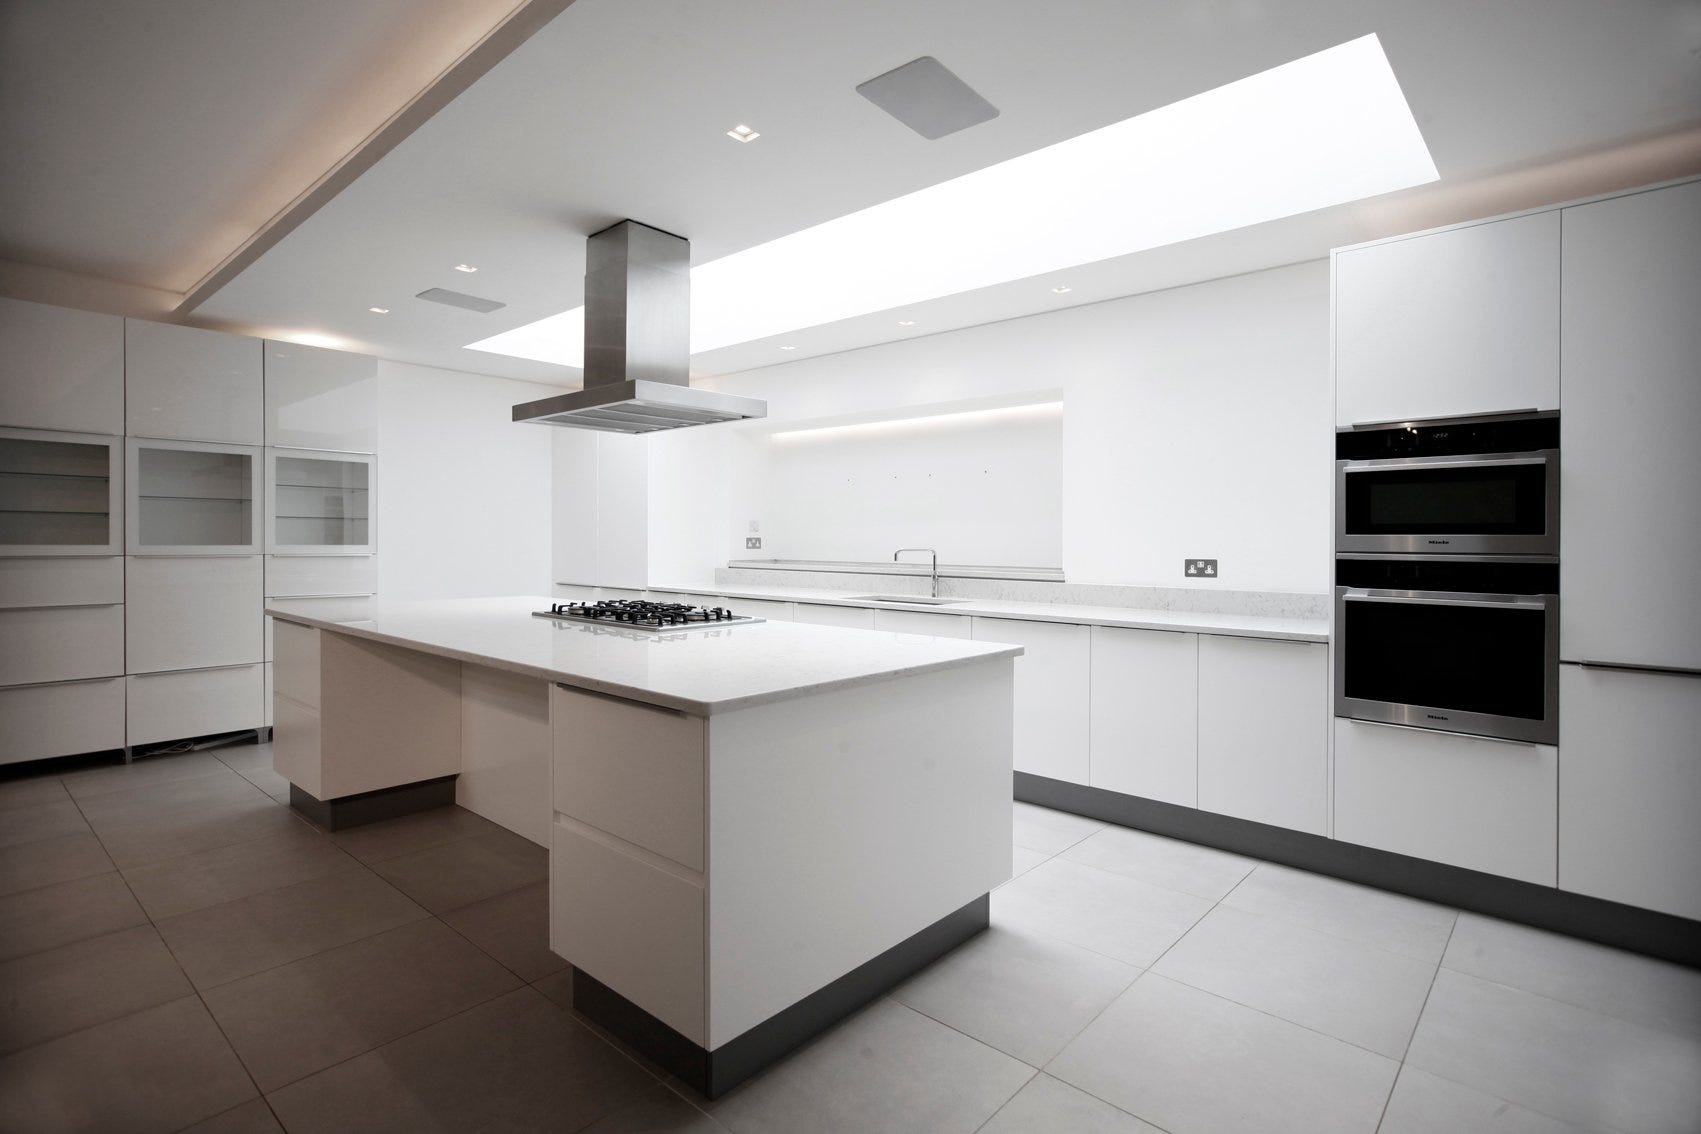 Approved Used Kitchen, Very large Contemporary, WOLF/Miele Appliances, London – Reduced